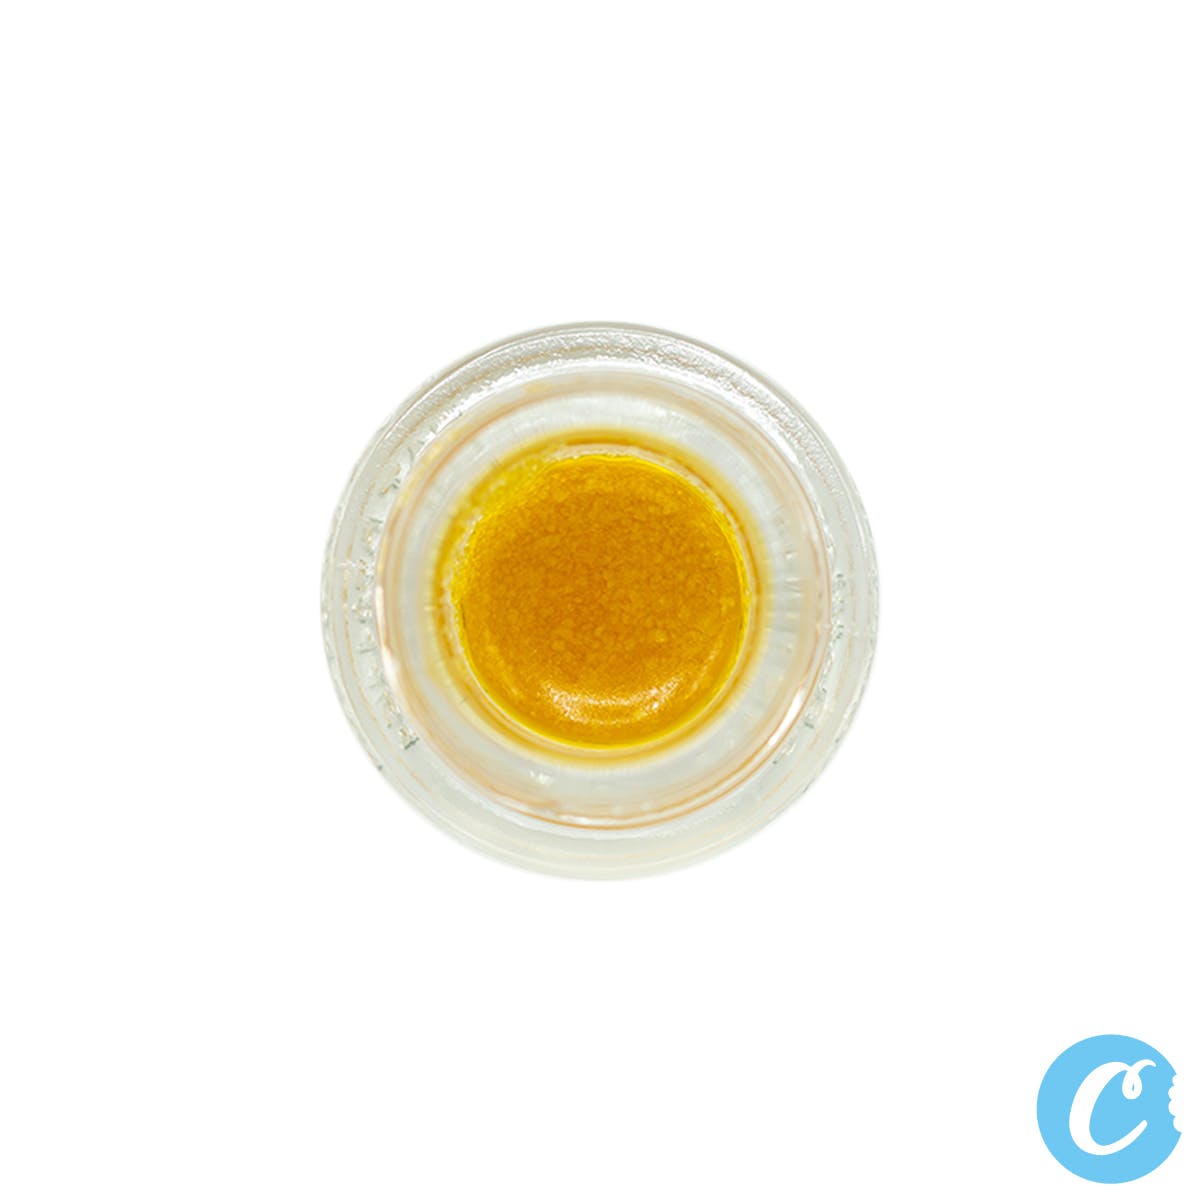 FIELD EXTRACTS SAUCE - Zmoothie #5